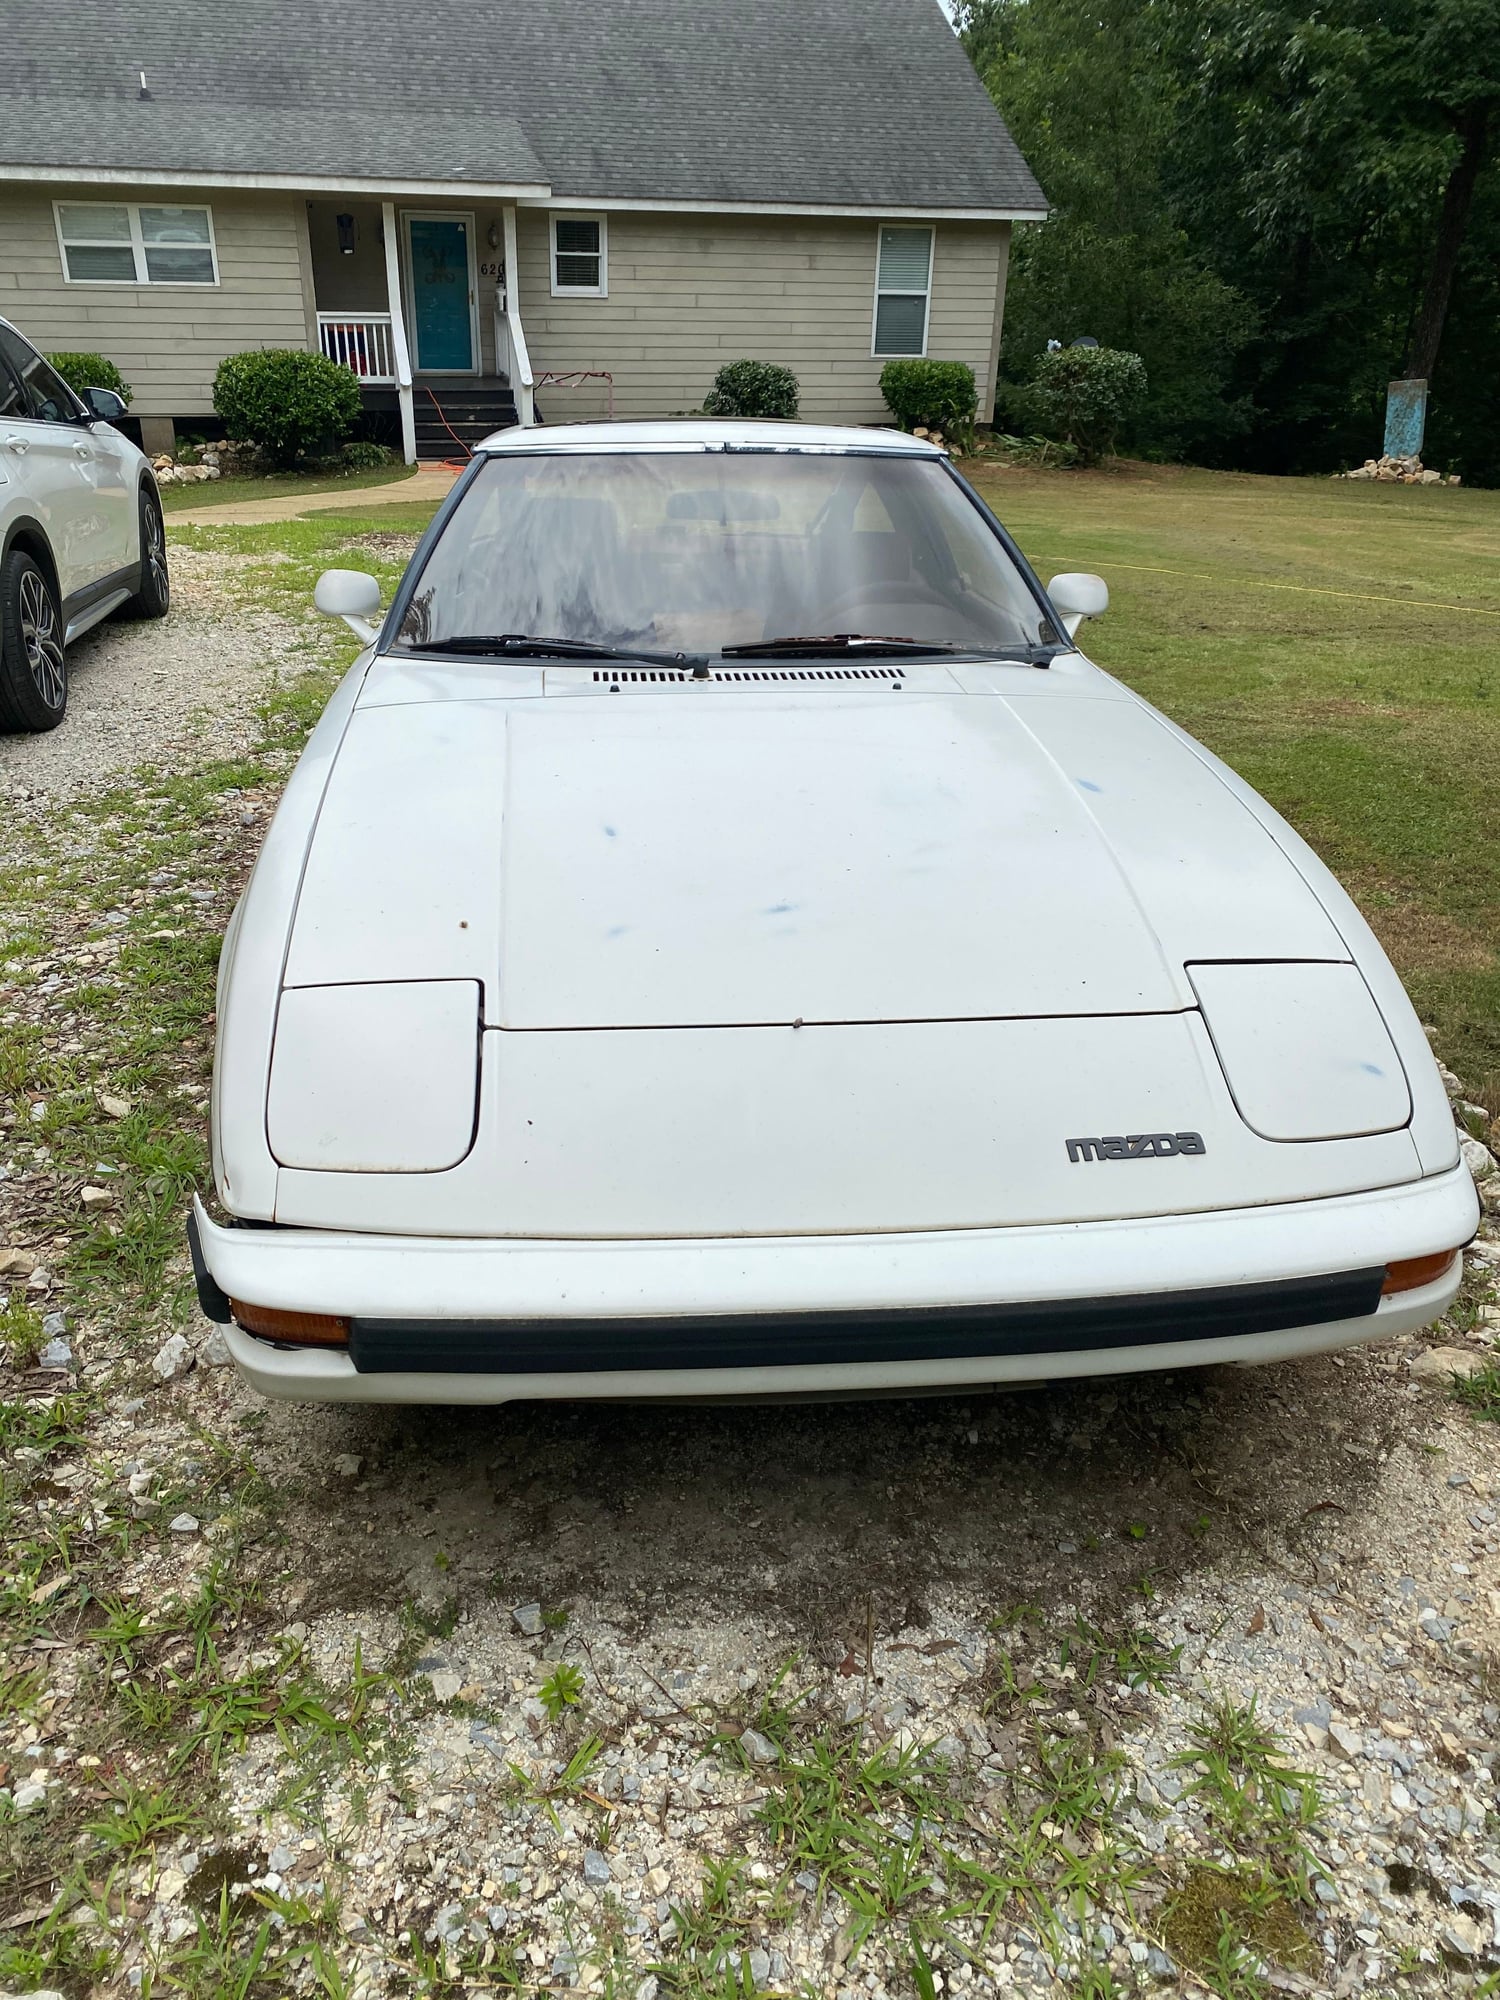 1985 Mazda RX-7 - FOR SALE - 1985 Classic RX-7 White - Used - VIN JM1FB3329F0894995 - 6 cyl - 2WD - Manual - Coupe - White - Valley, AL 36854, United States